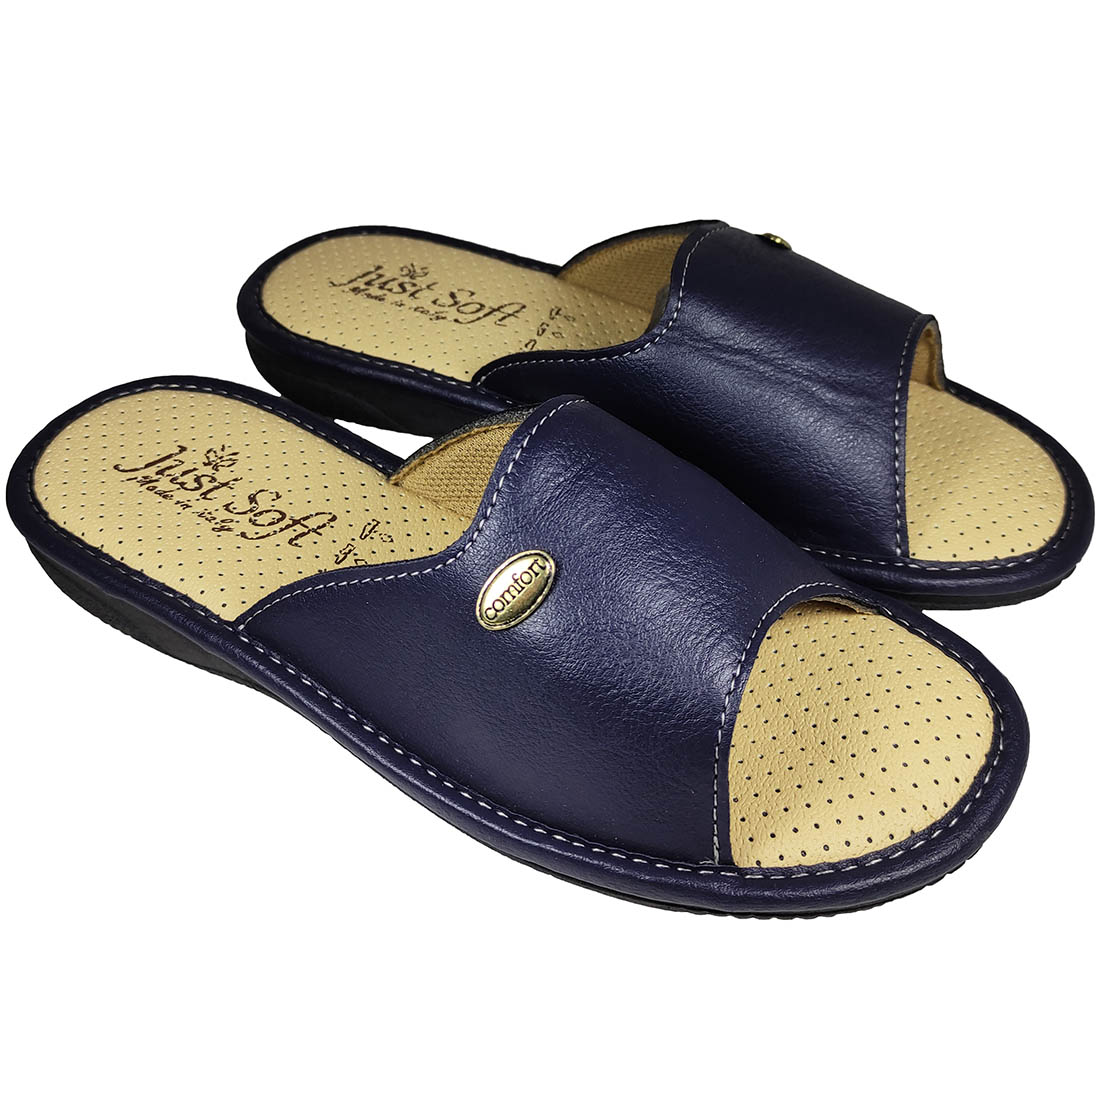 Italian Anatomical slippers Just Soft 1610 Blue